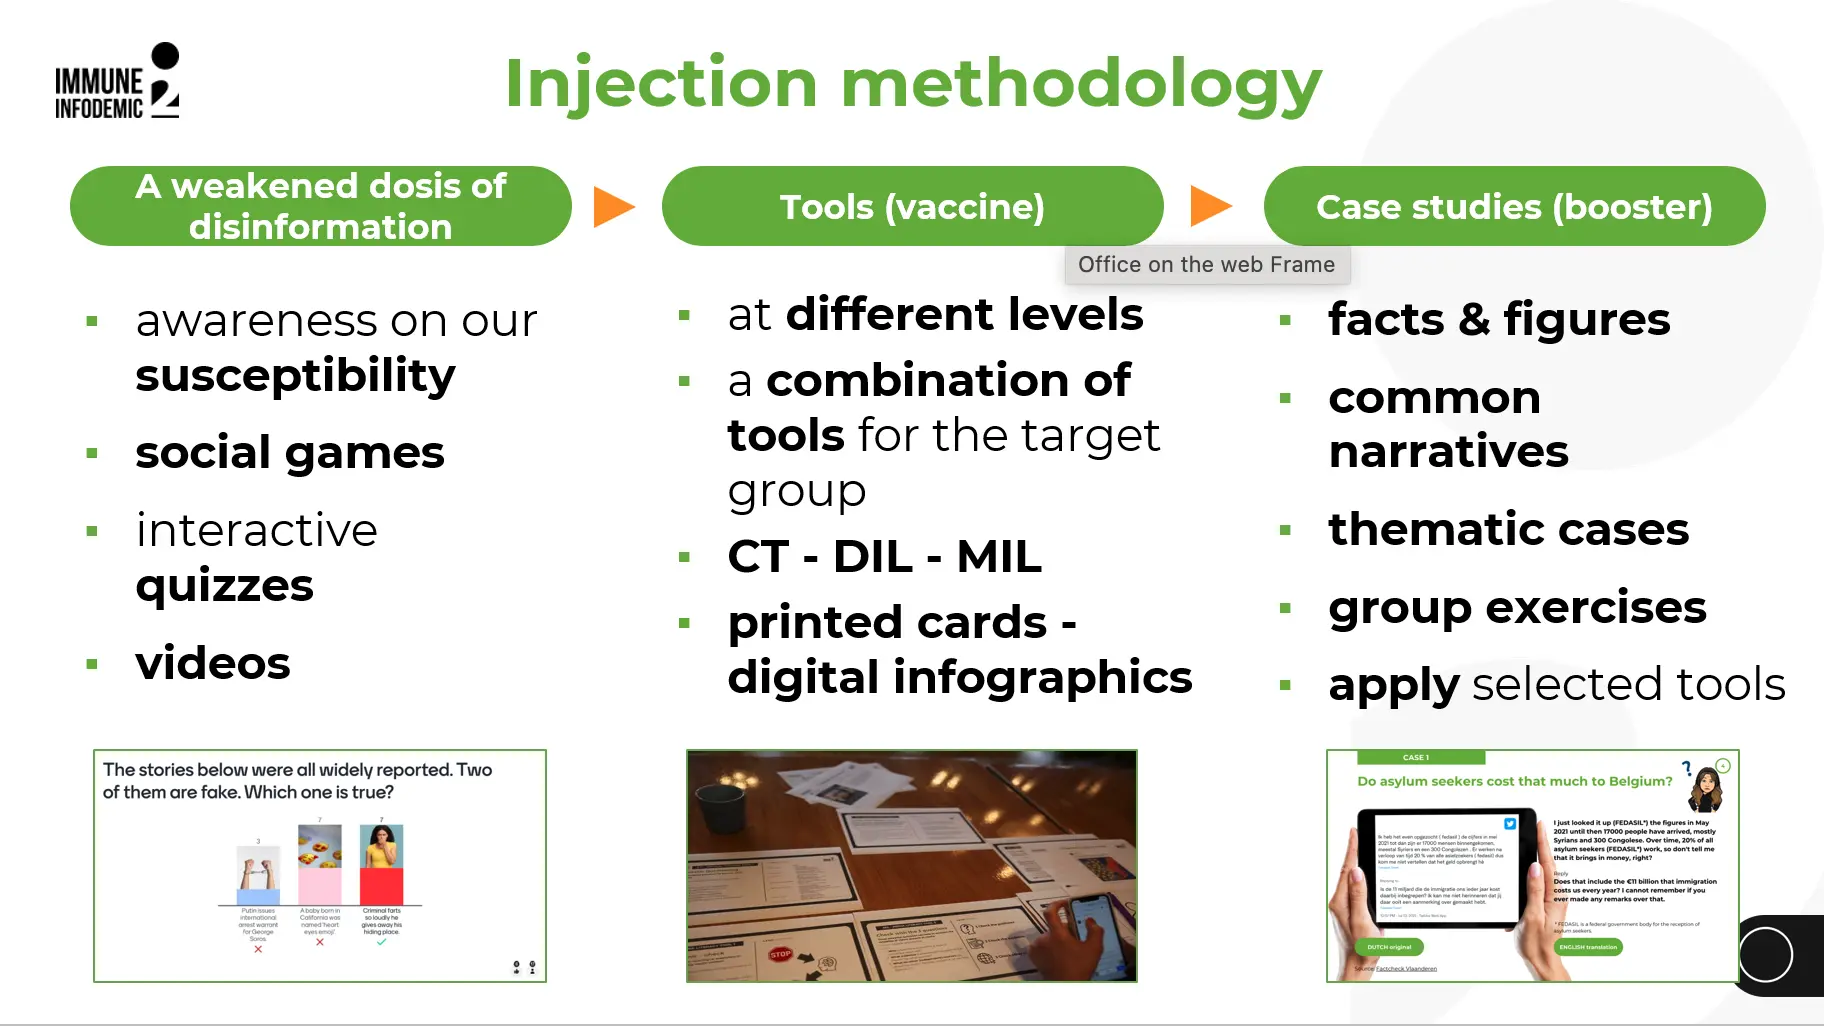 INJECTION METHODOLGY Beyond the Horizon ISSG Immune to infodemic project